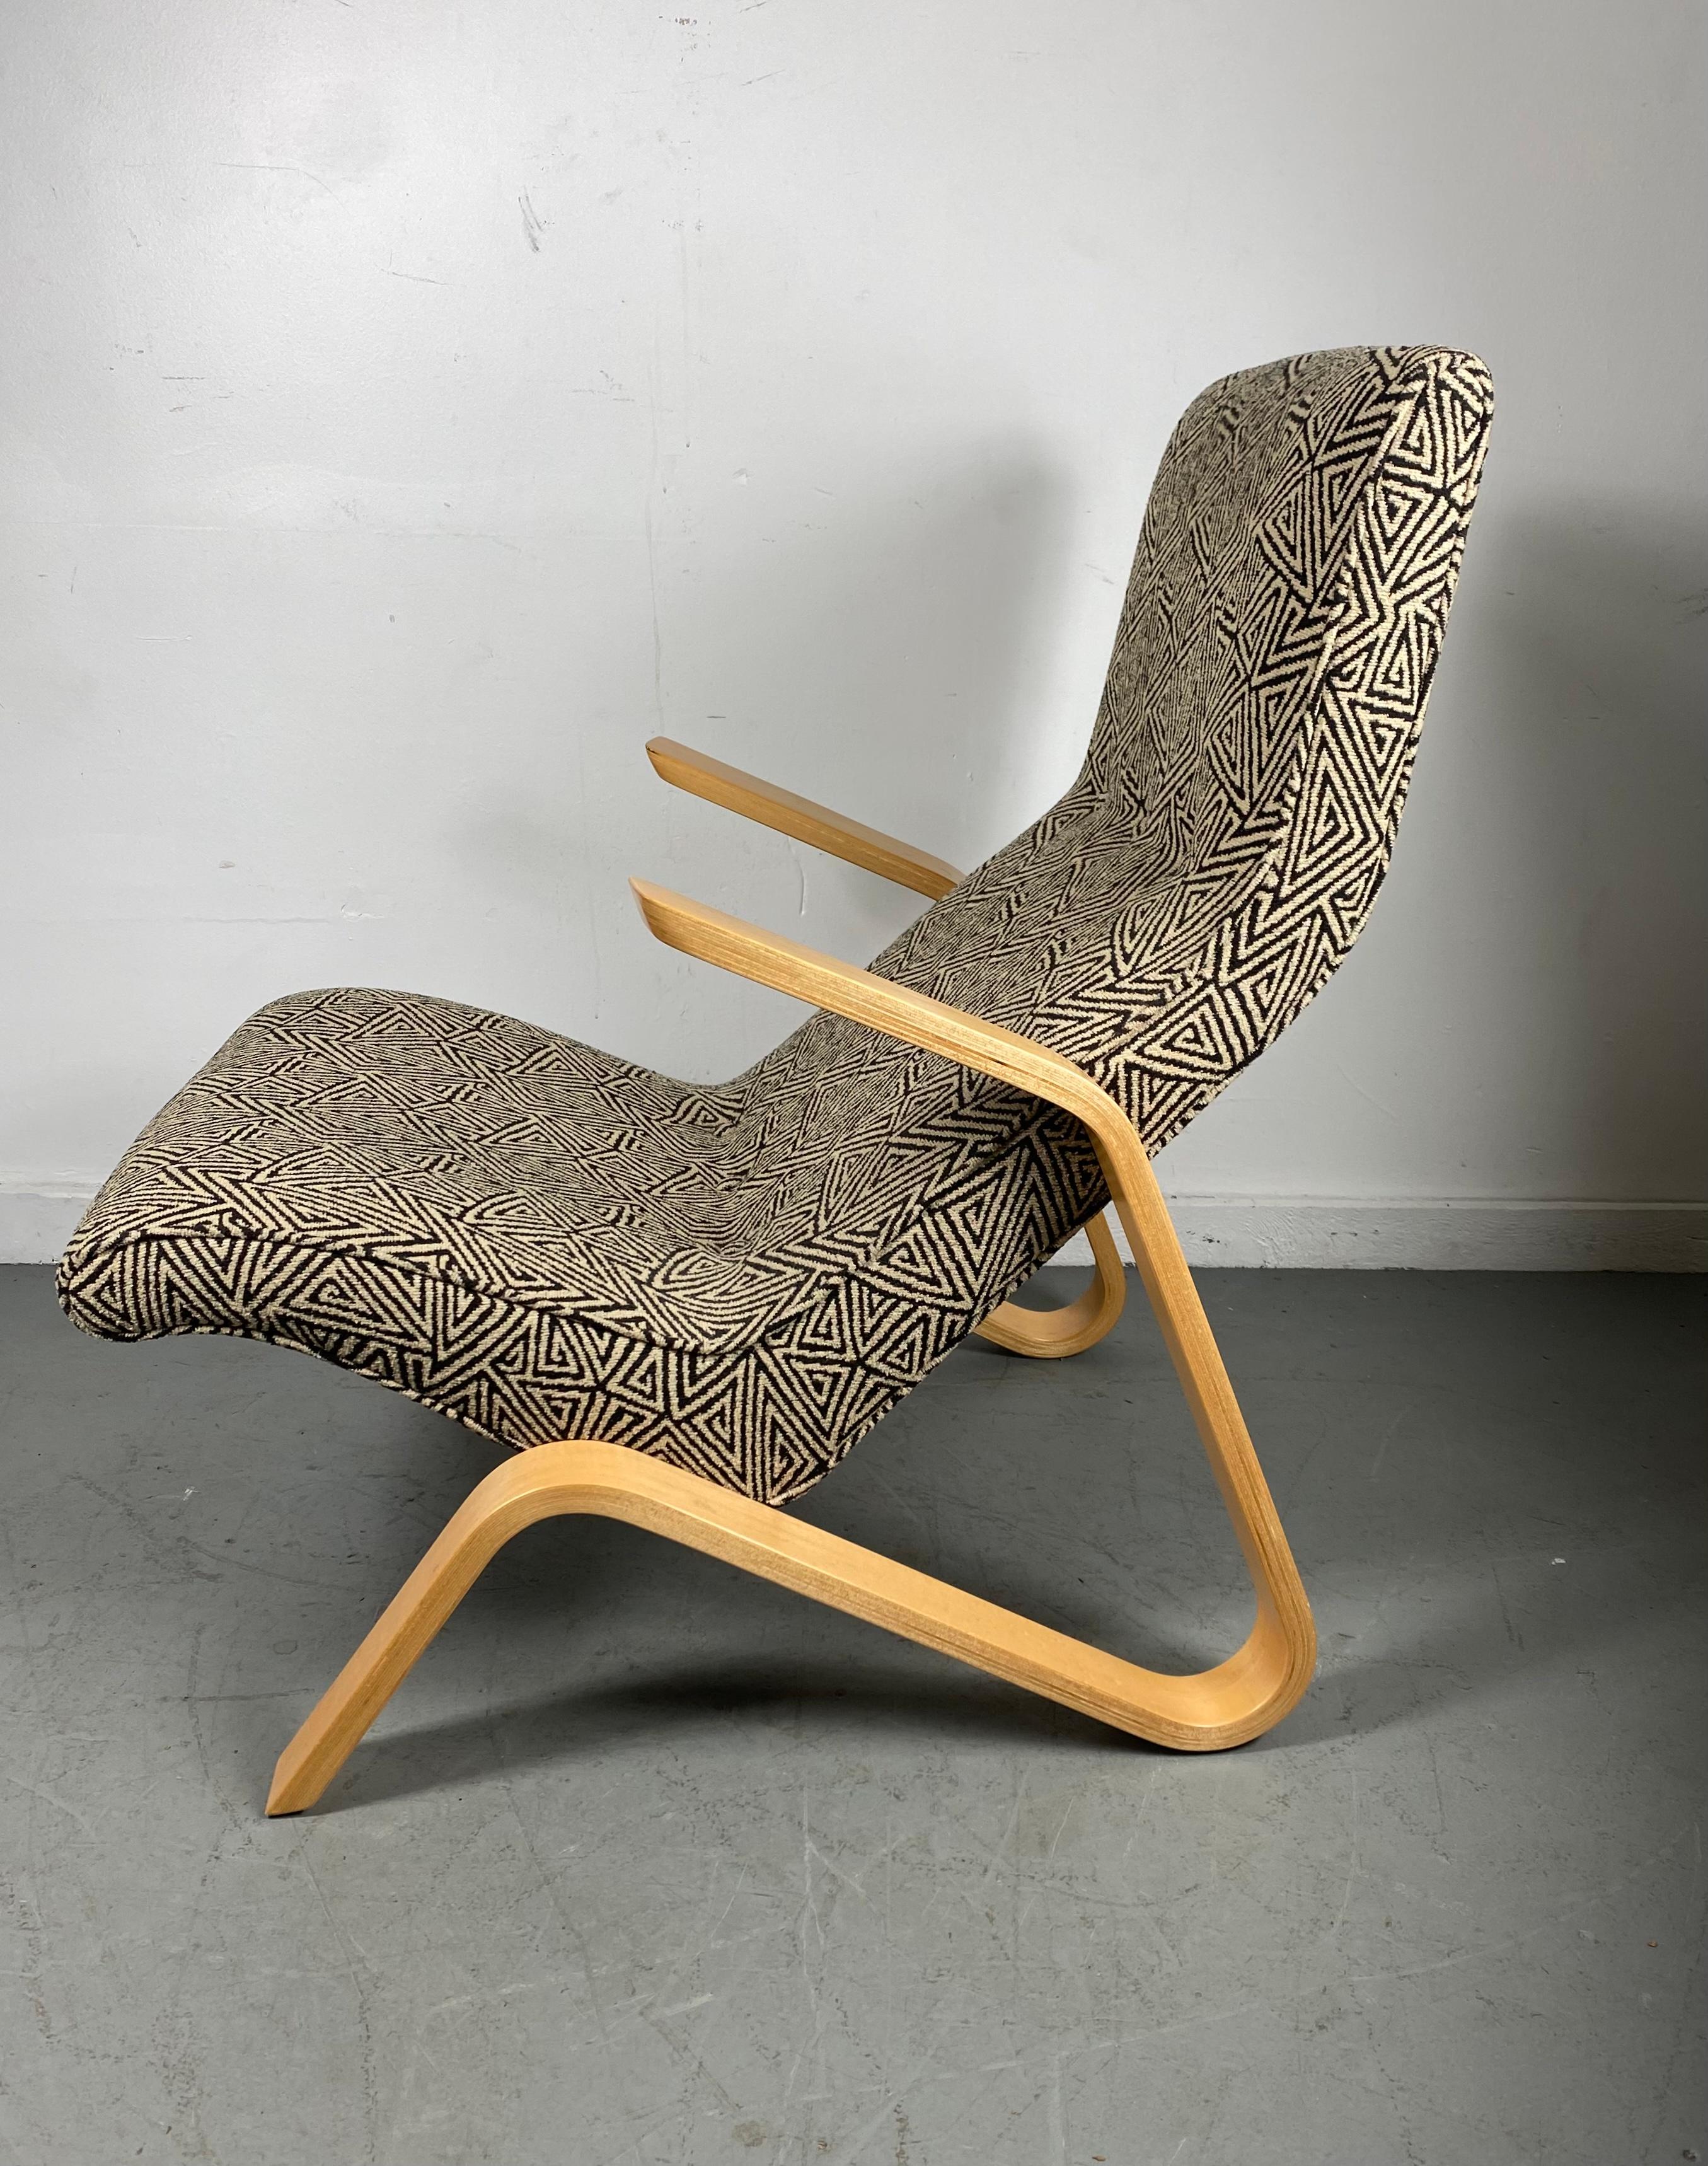 Classic modernist grasshopper lounge chair designed by Eero Saarinen manufactured by Modernica,,, Retains original contemporary wool fabric,, Extremely comfortable,,Superior quality and construction,, Hand delivery avail to New York City or anywhere